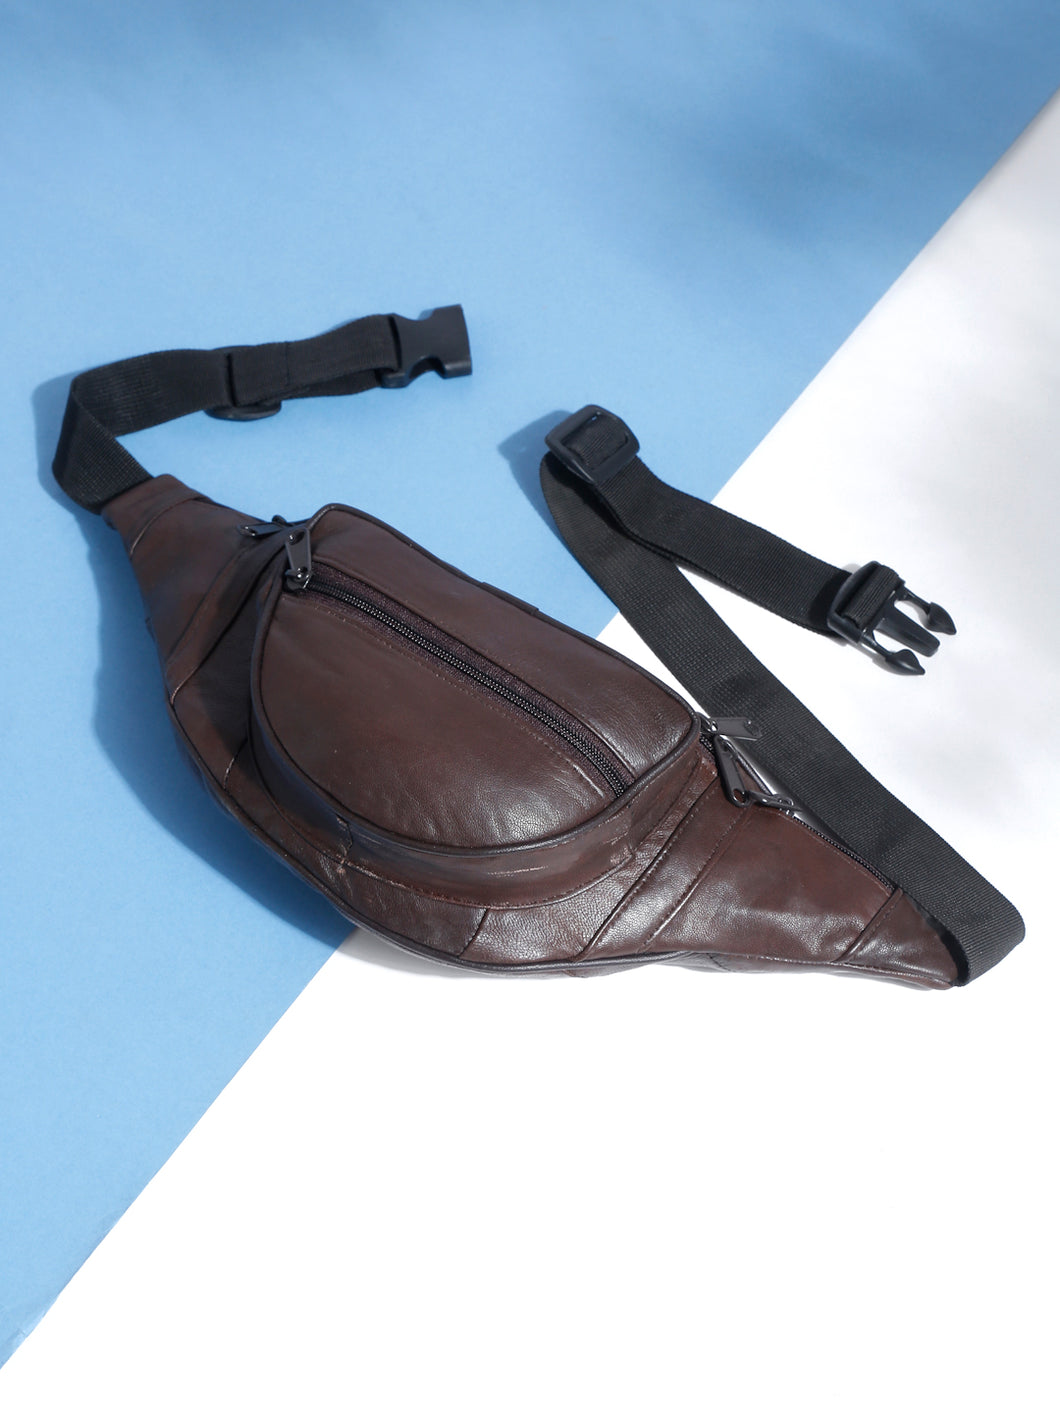 Black Leather Waist Pouch Manufacturer, Supplier, Exporter - Latest Price